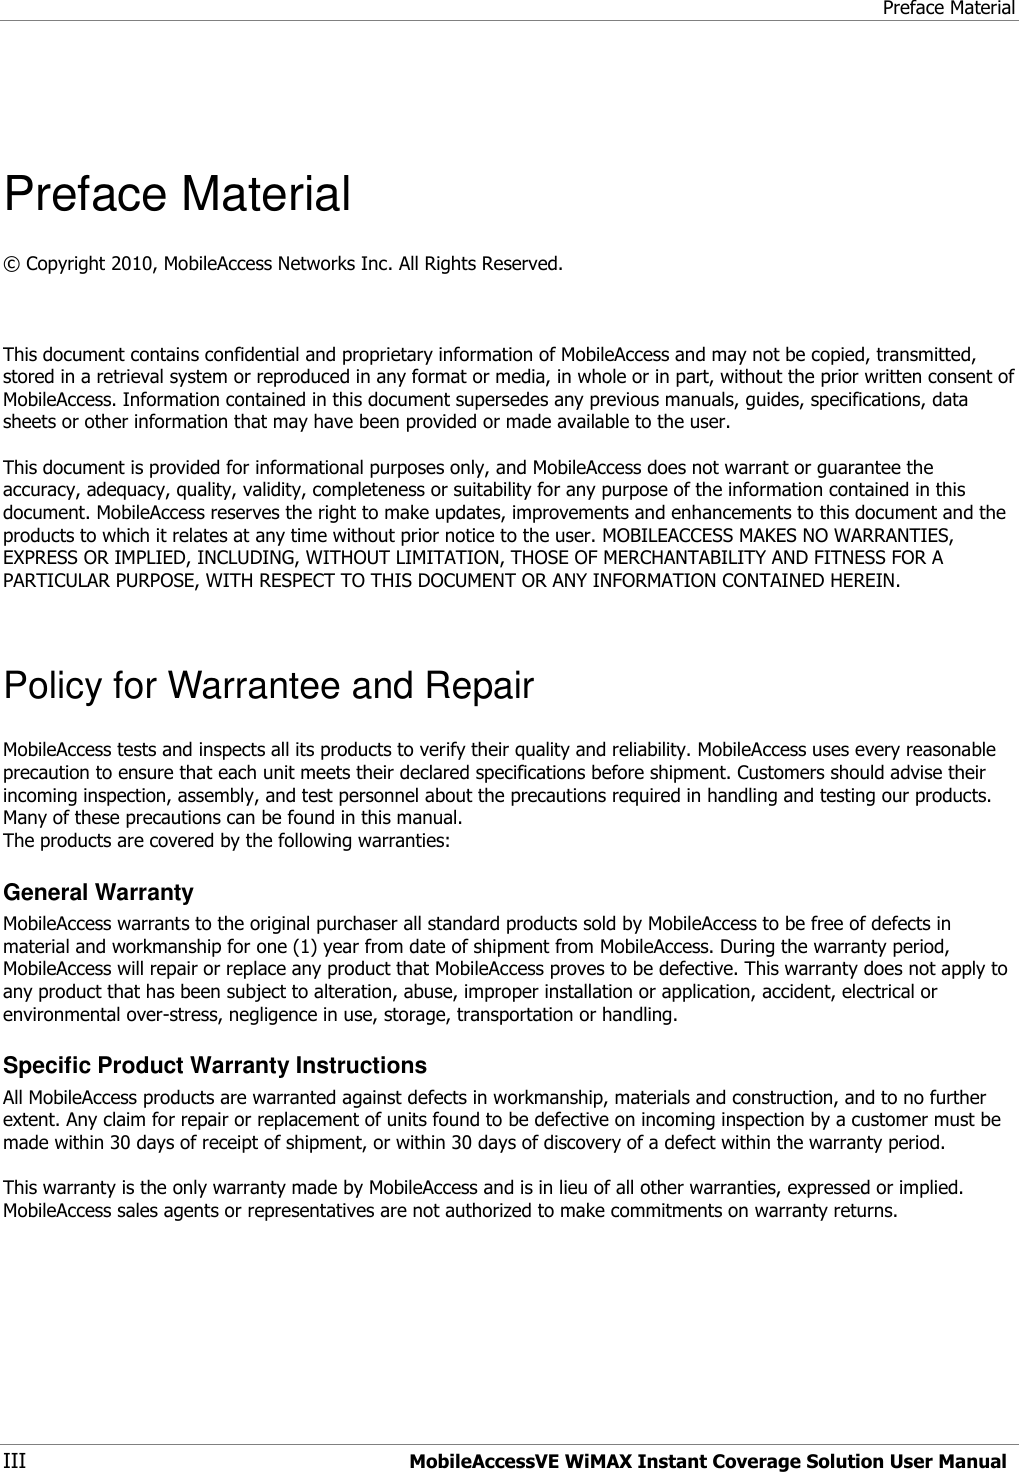 Preface Material III MobileAccessVE WiMAX Instant Coverage Solution User Manual    Preface Material © Copyright 2010, MobileAccess Networks Inc. All Rights Reserved.    This document contains confidential and proprietary information of MobileAccess and may not be copied, transmitted, stored in a retrieval system or reproduced in any format or media, in whole or in part, without the prior written consent of MobileAccess. Information contained in this document supersedes any previous manuals, guides, specifications, data sheets or other information that may have been provided or made available to the user.   This document is provided for informational purposes only, and MobileAccess does not warrant or guarantee the accuracy, adequacy, quality, validity, completeness or suitability for any purpose of the information contained in this document. MobileAccess reserves the right to make updates, improvements and enhancements to this document and the products to which it relates at any time without prior notice to the user. MOBILEACCESS MAKES NO WARRANTIES, EXPRESS OR IMPLIED, INCLUDING, WITHOUT LIMITATION, THOSE OF MERCHANTABILITY AND FITNESS FOR A PARTICULAR PURPOSE, WITH RESPECT TO THIS DOCUMENT OR ANY INFORMATION CONTAINED HEREIN.  Policy for Warrantee and Repair MobileAccess tests and inspects all its products to verify their quality and reliability. MobileAccess uses every reasonable precaution to ensure that each unit meets their declared specifications before shipment. Customers should advise their incoming inspection, assembly, and test personnel about the precautions required in handling and testing our products. Many of these precautions can be found in this manual. The products are covered by the following warranties: General Warranty MobileAccess warrants to the original purchaser all standard products sold by MobileAccess to be free of defects in material and workmanship for one (1) year from date of shipment from MobileAccess. During the warranty period, MobileAccess will repair or replace any product that MobileAccess proves to be defective. This warranty does not apply to any product that has been subject to alteration, abuse, improper installation or application, accident, electrical or environmental over-stress, negligence in use, storage, transportation or handling. Specific Product Warranty Instructions All MobileAccess products are warranted against defects in workmanship, materials and construction, and to no further extent. Any claim for repair or replacement of units found to be defective on incoming inspection by a customer must be made within 30 days of receipt of shipment, or within 30 days of discovery of a defect within the warranty period.  This warranty is the only warranty made by MobileAccess and is in lieu of all other warranties, expressed or implied. MobileAccess sales agents or representatives are not authorized to make commitments on warranty returns. 